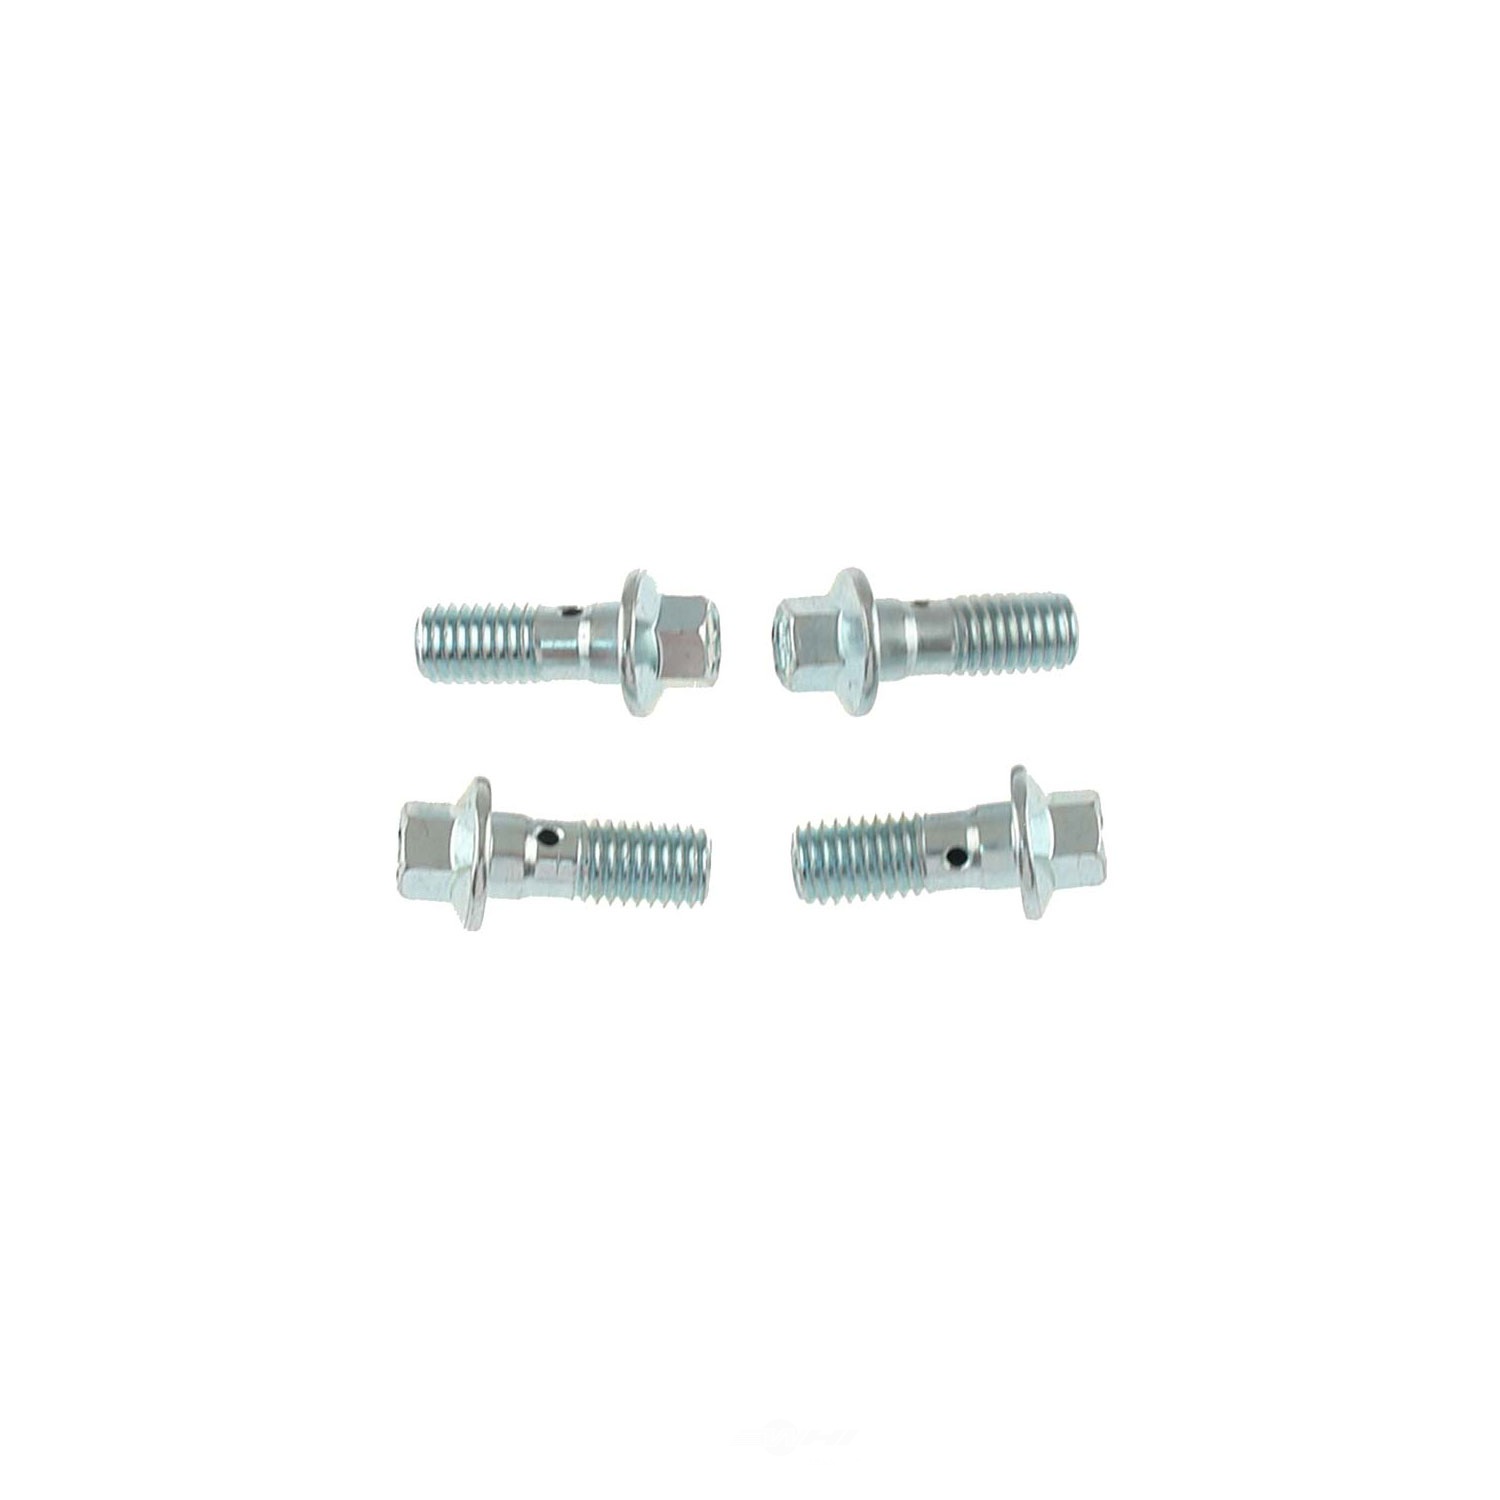 CARLSON QUALITY BRAKE PARTS - Contains 1 Bolt and 2 Washers - CRL H9469